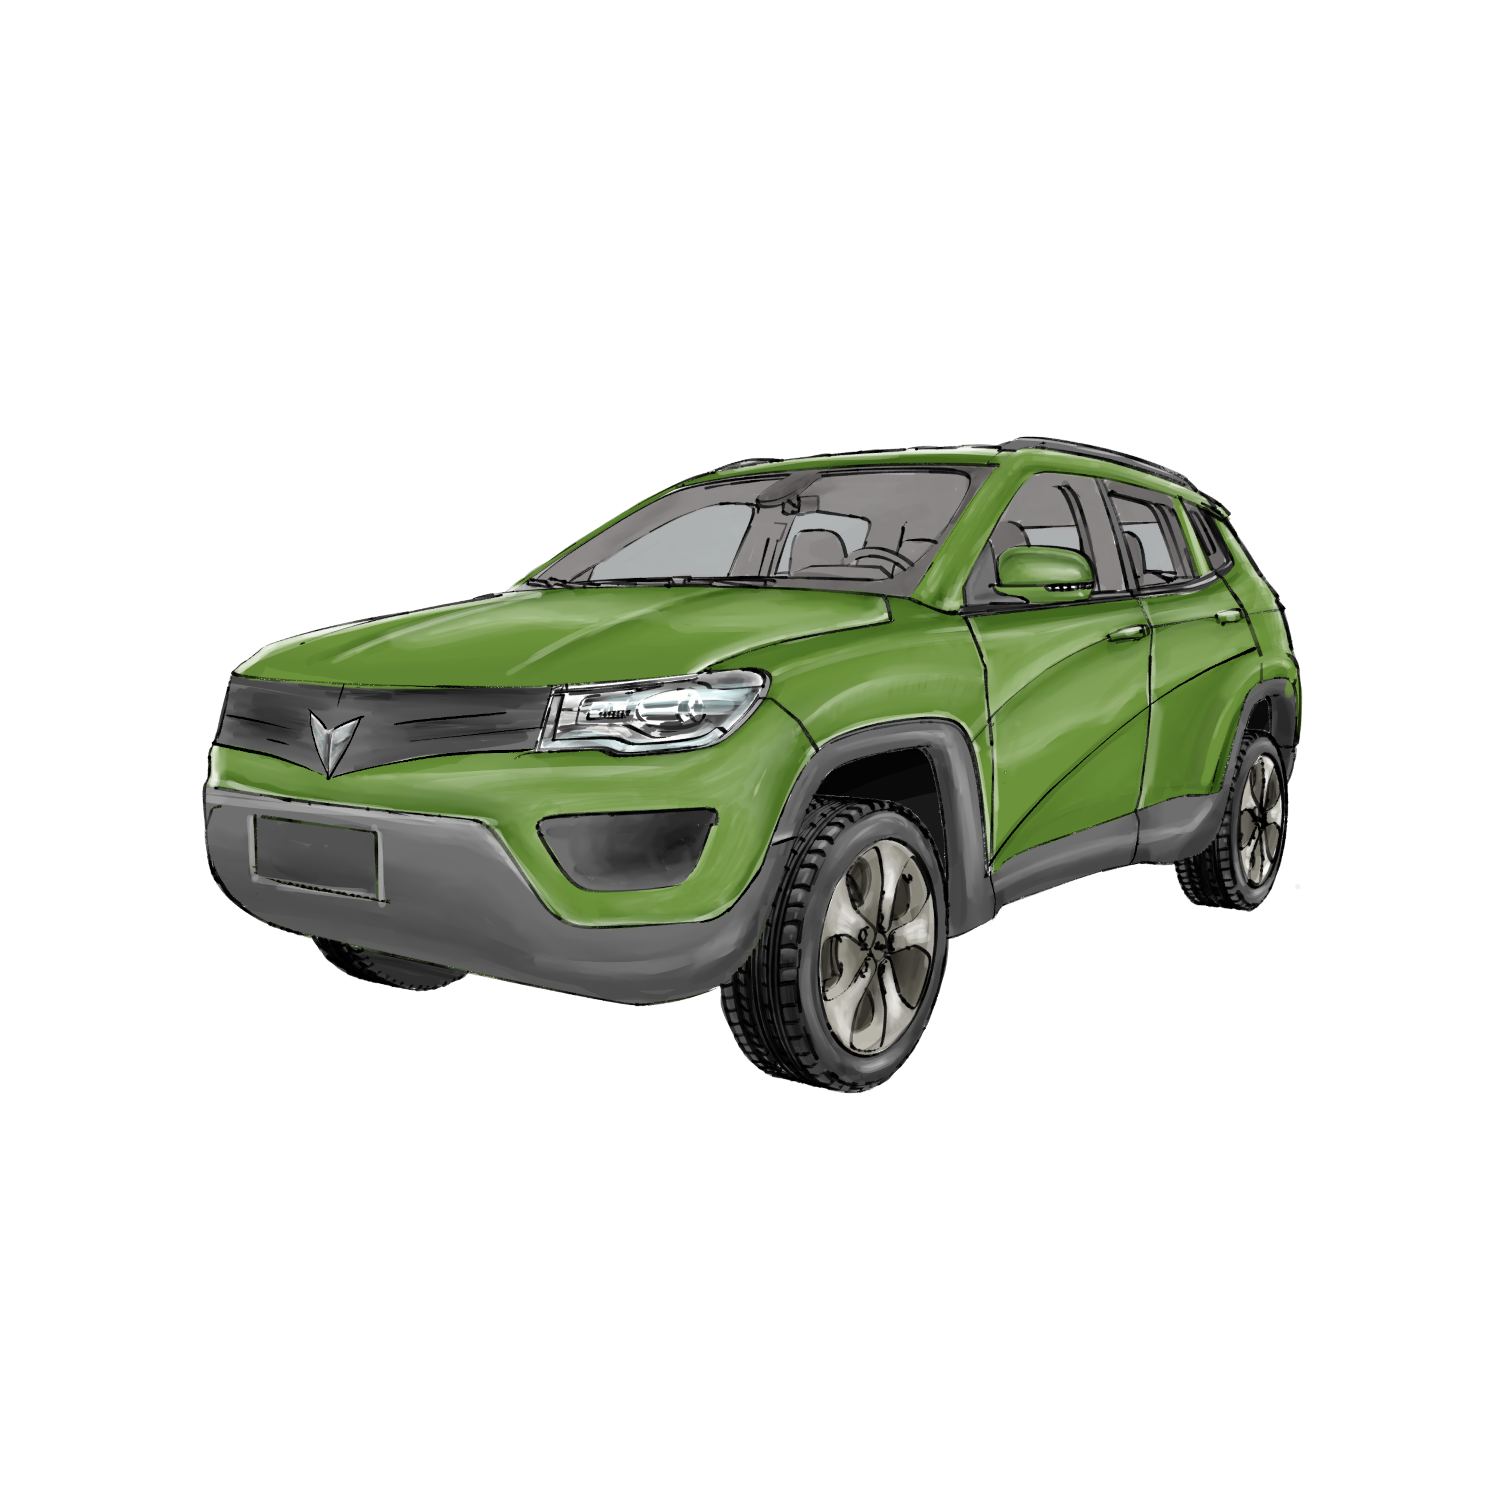  Product image 1 of the product “OX5 Family SUV ”